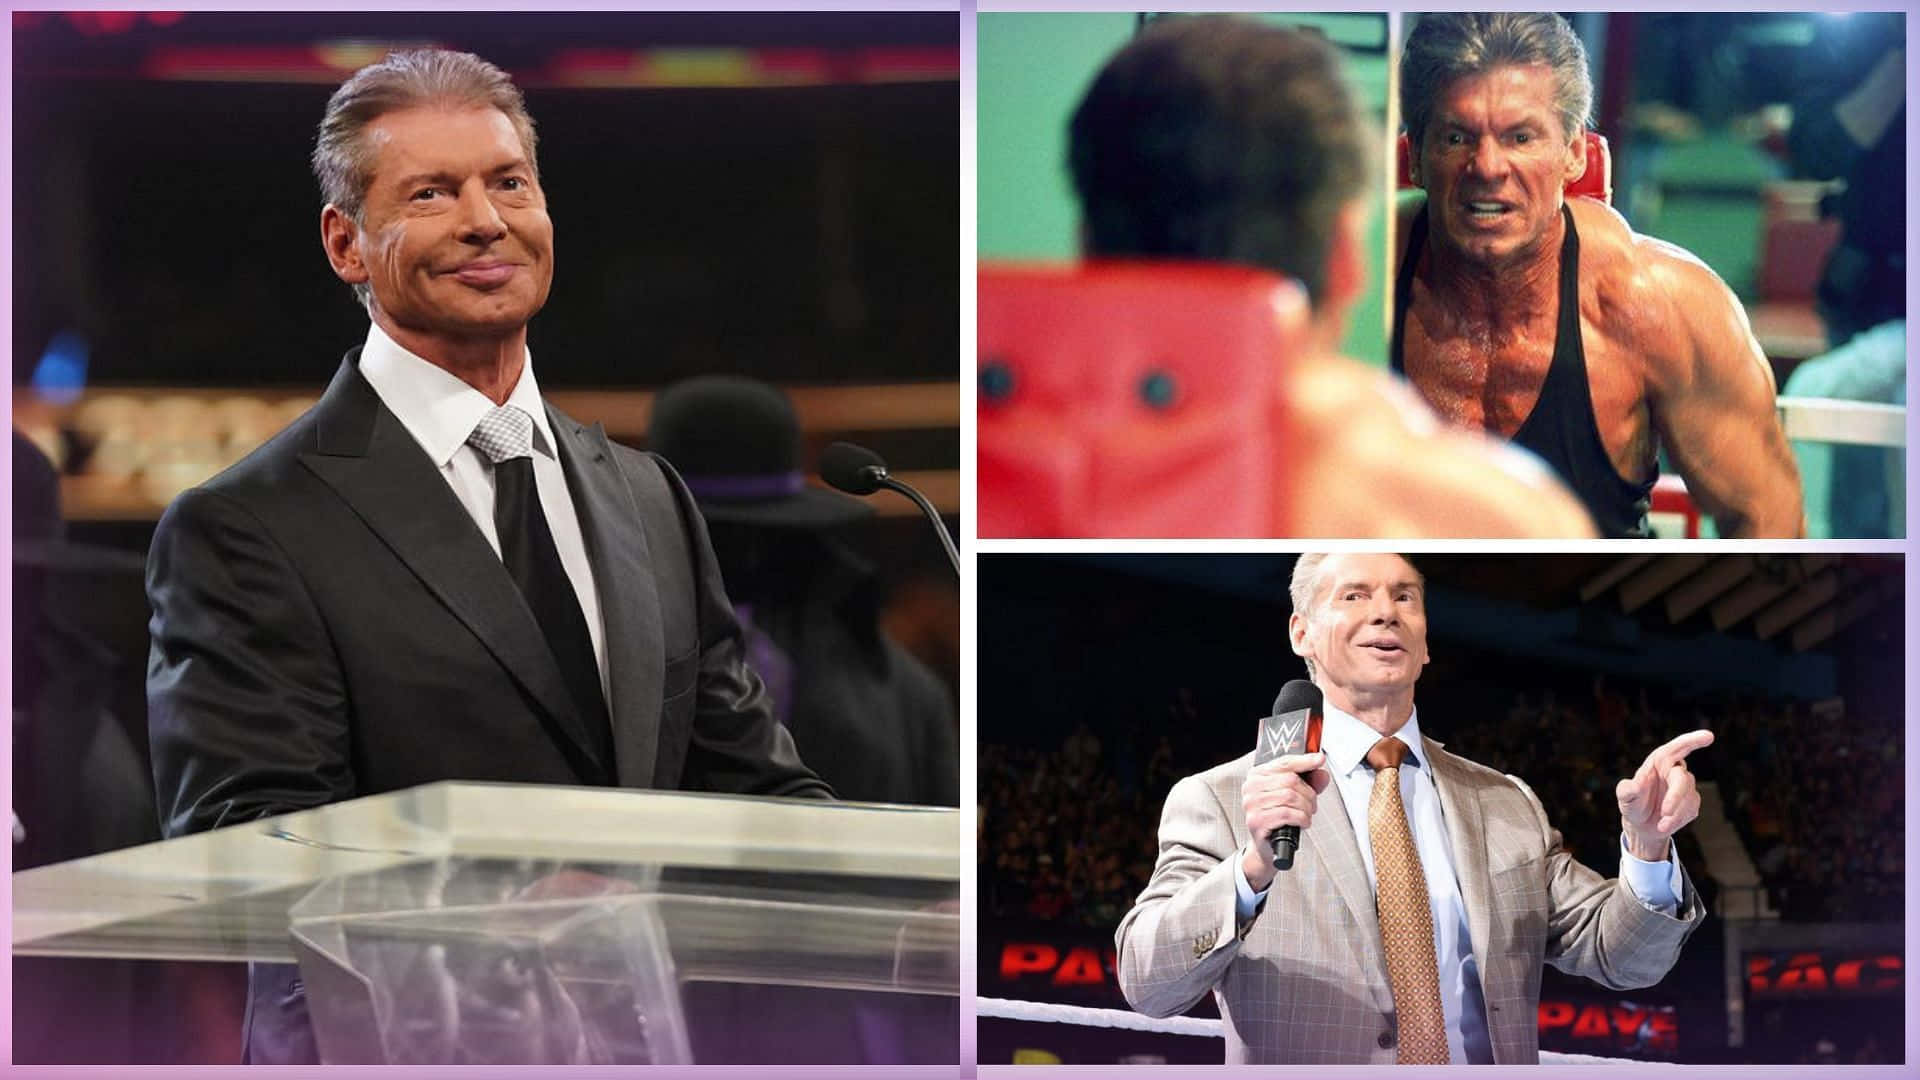 Wwe Ceo Vince Mcmahon Collage Background